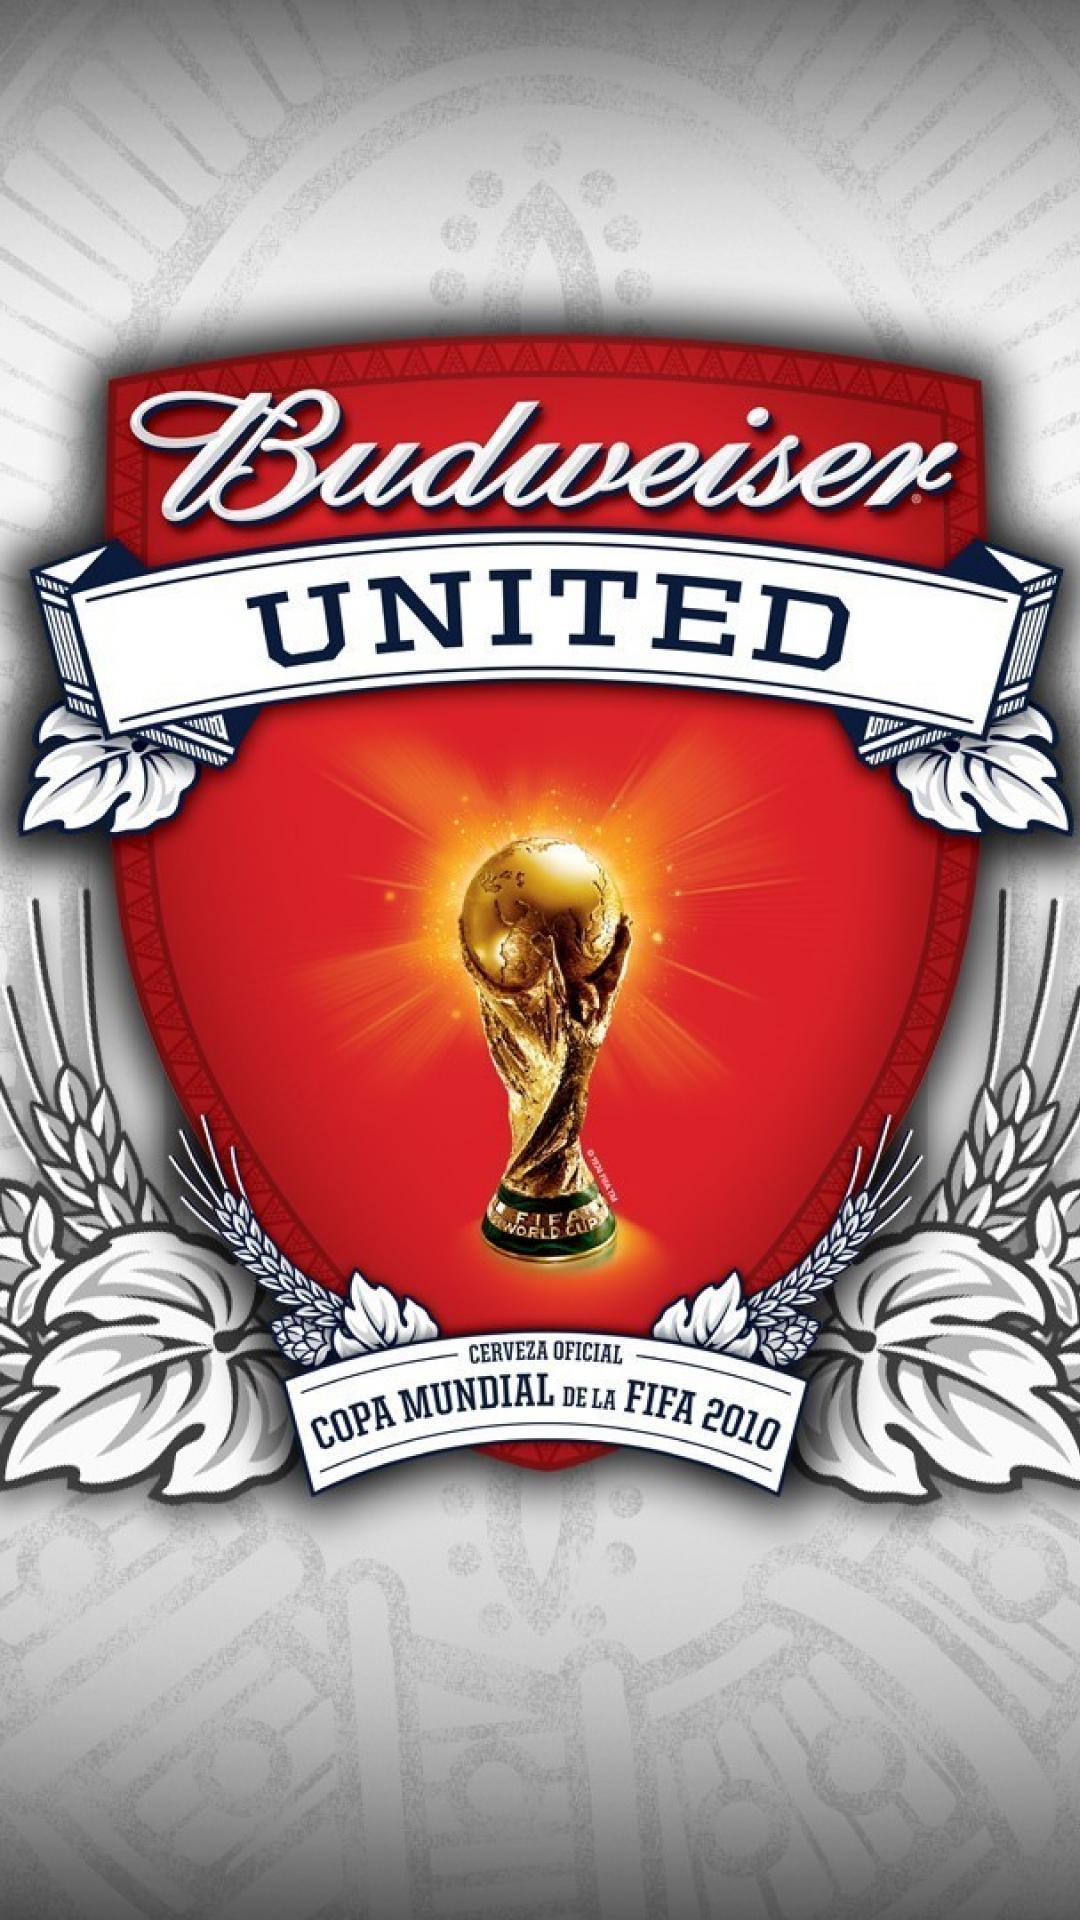 Beers alcohol budweiser fifa world cup logos 2010 wallpaper